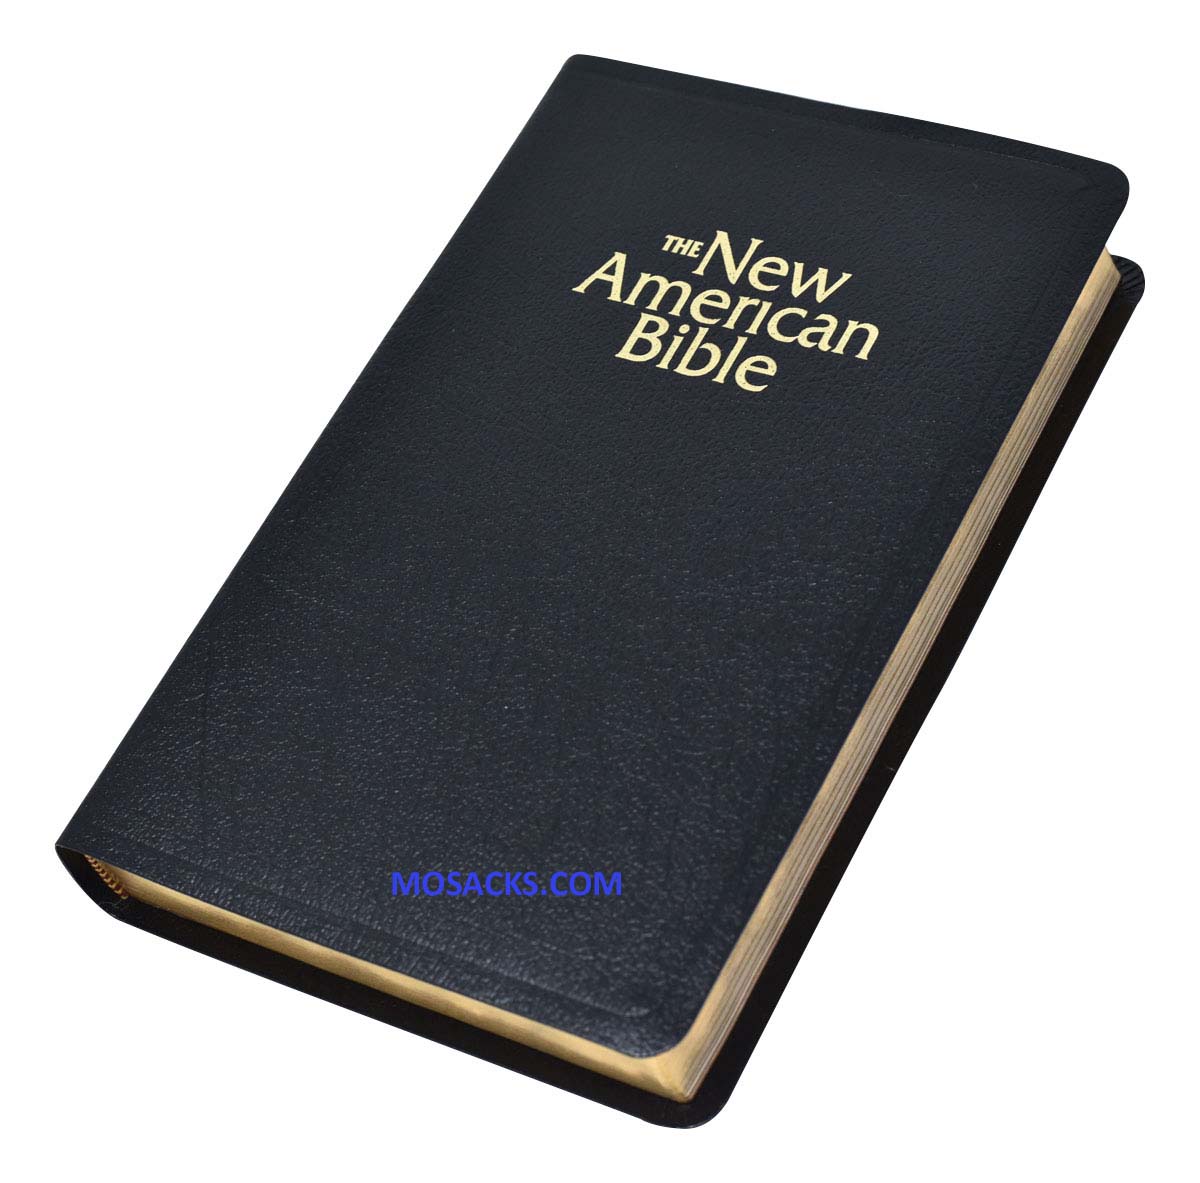 NABRE Deluxe Gift Bible W2406 Black Bonded Leather-9780529057525 from Catholic Book Company 